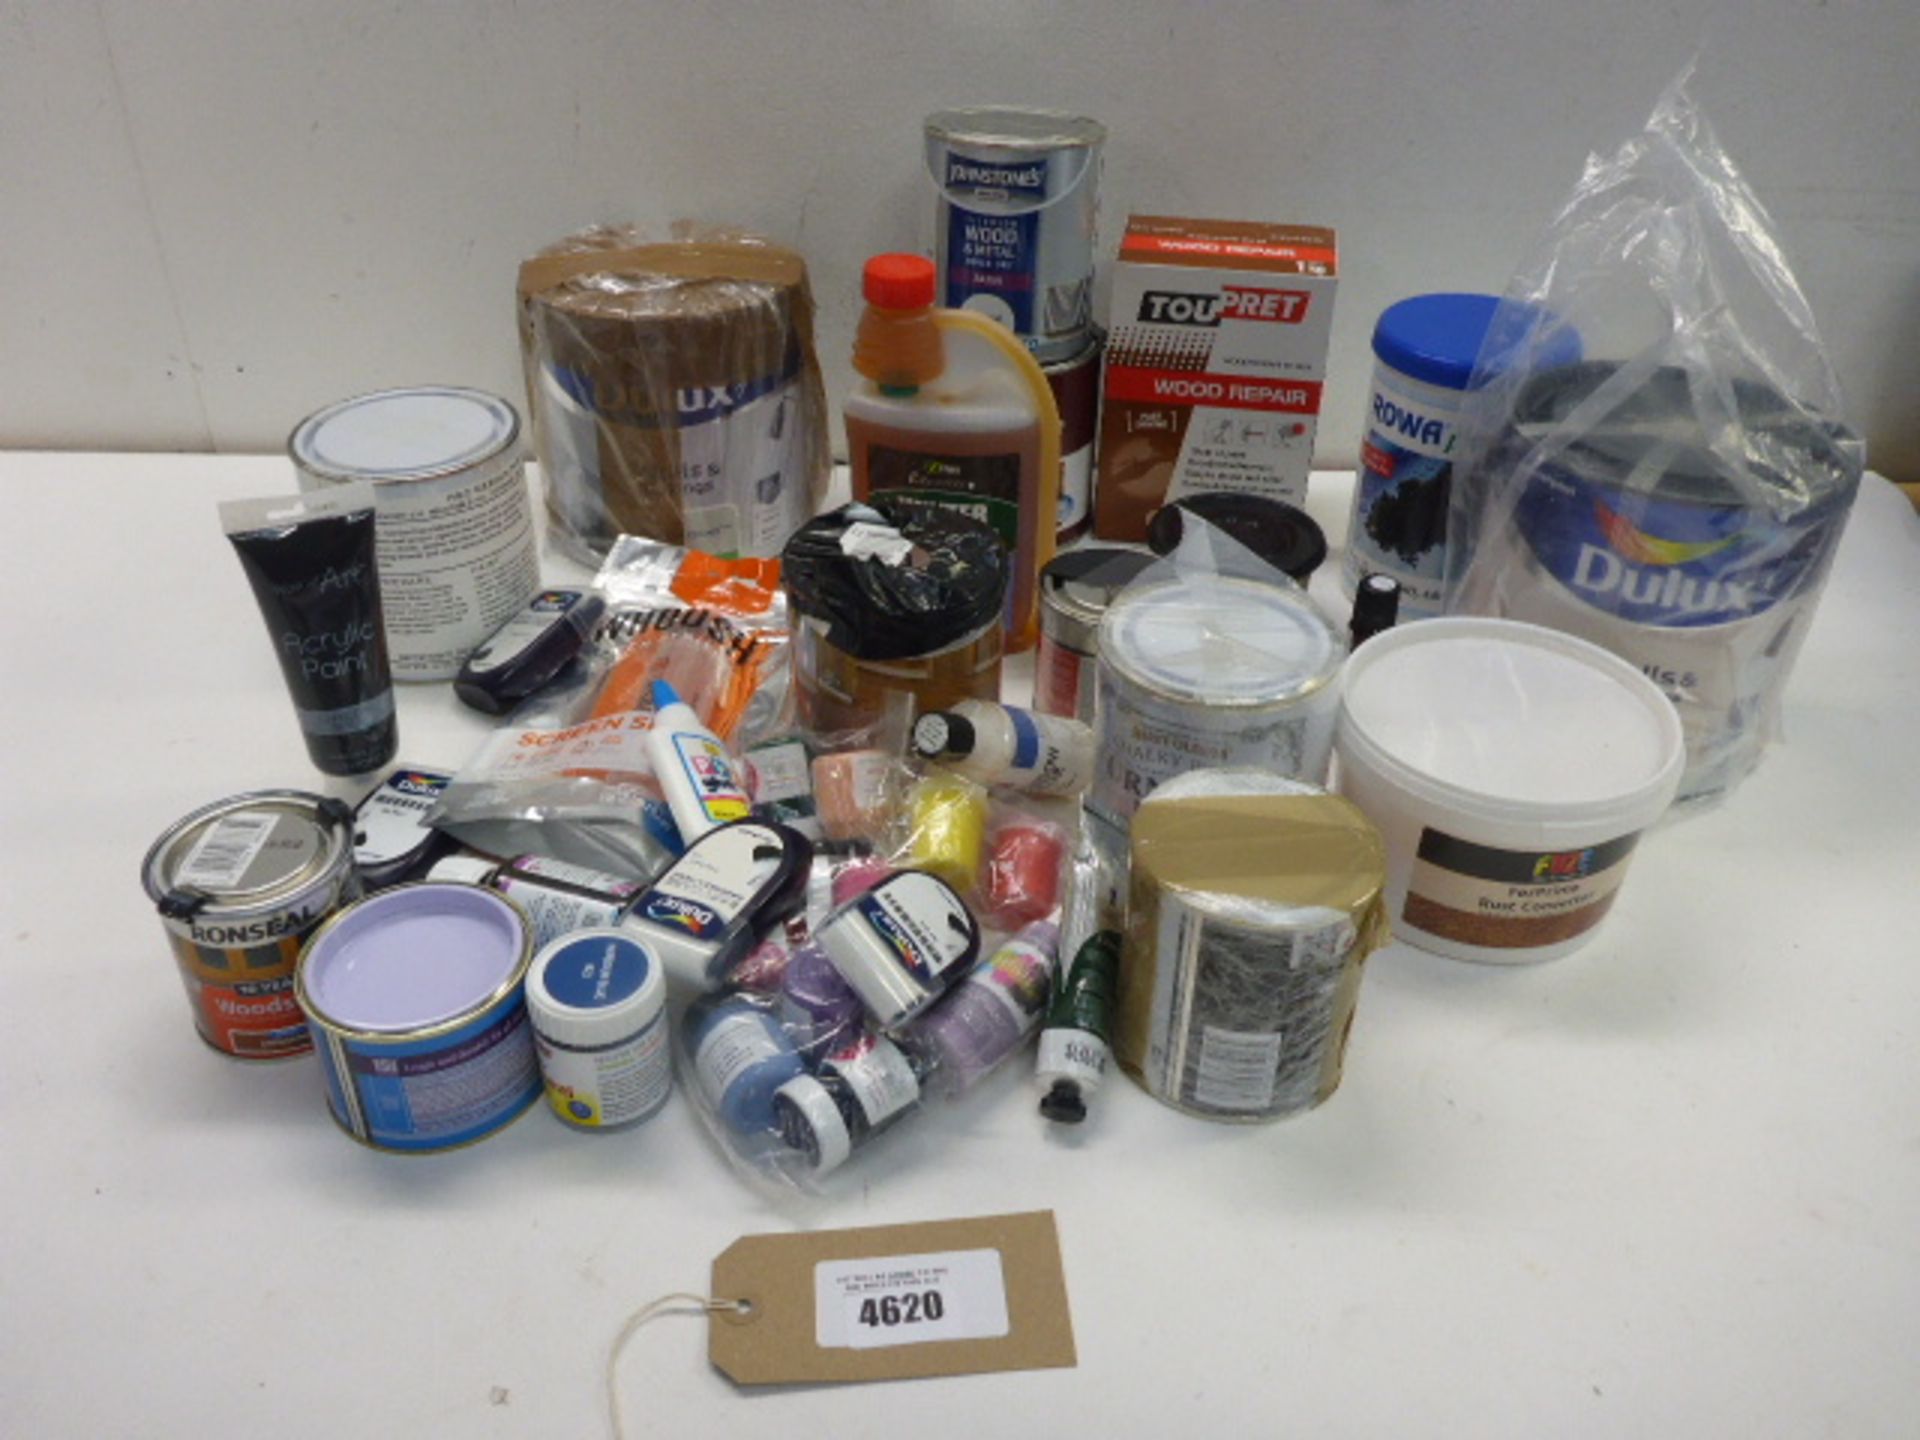 Selection of paints, varnish, wood repair and other liquid products